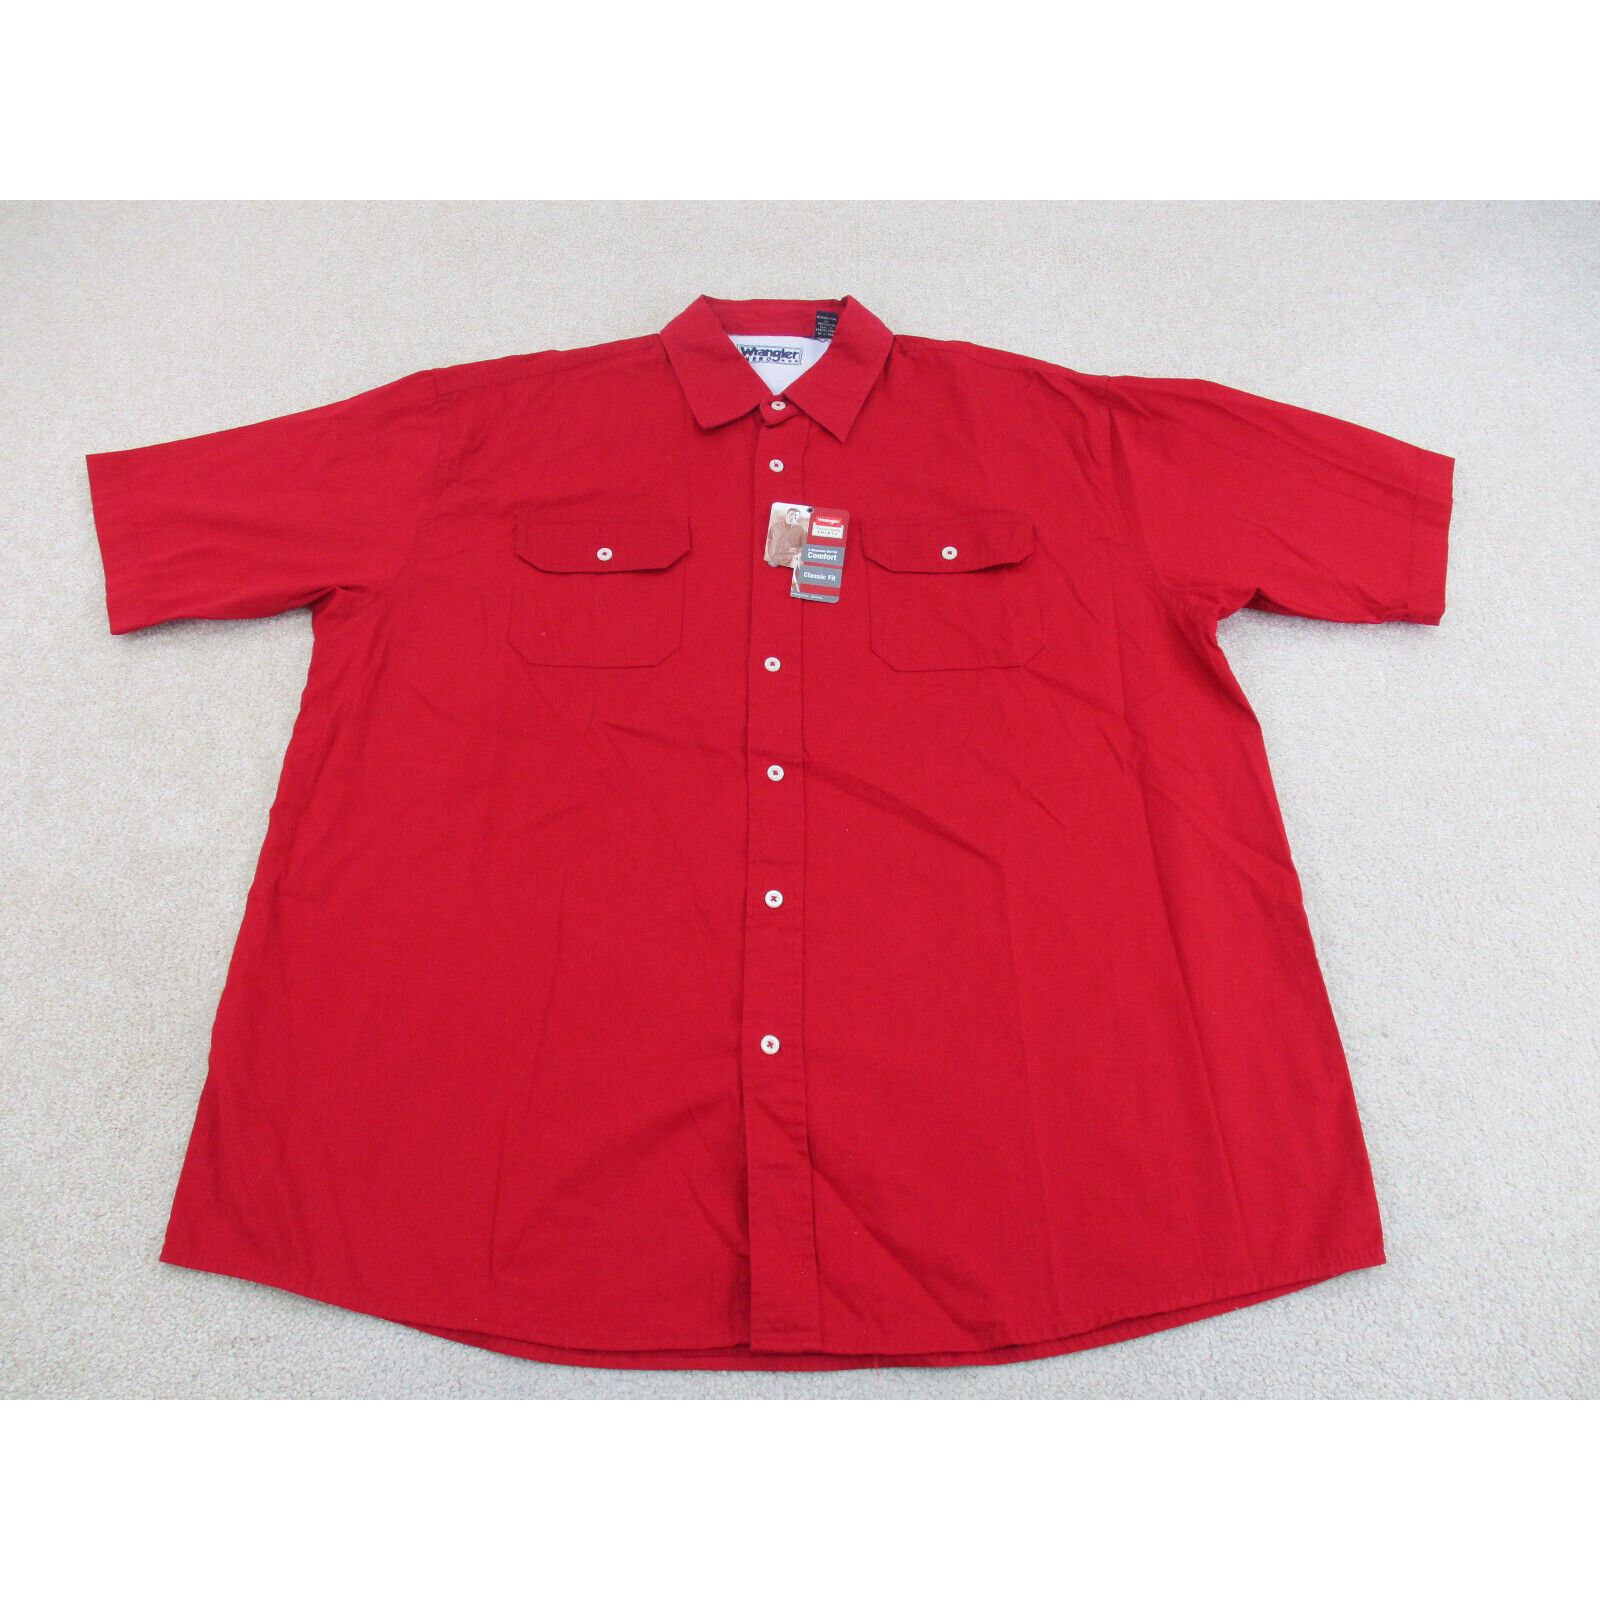 Wrangler Wrangler Shirt Adult Extra Large Red Western Wear Button Up ...